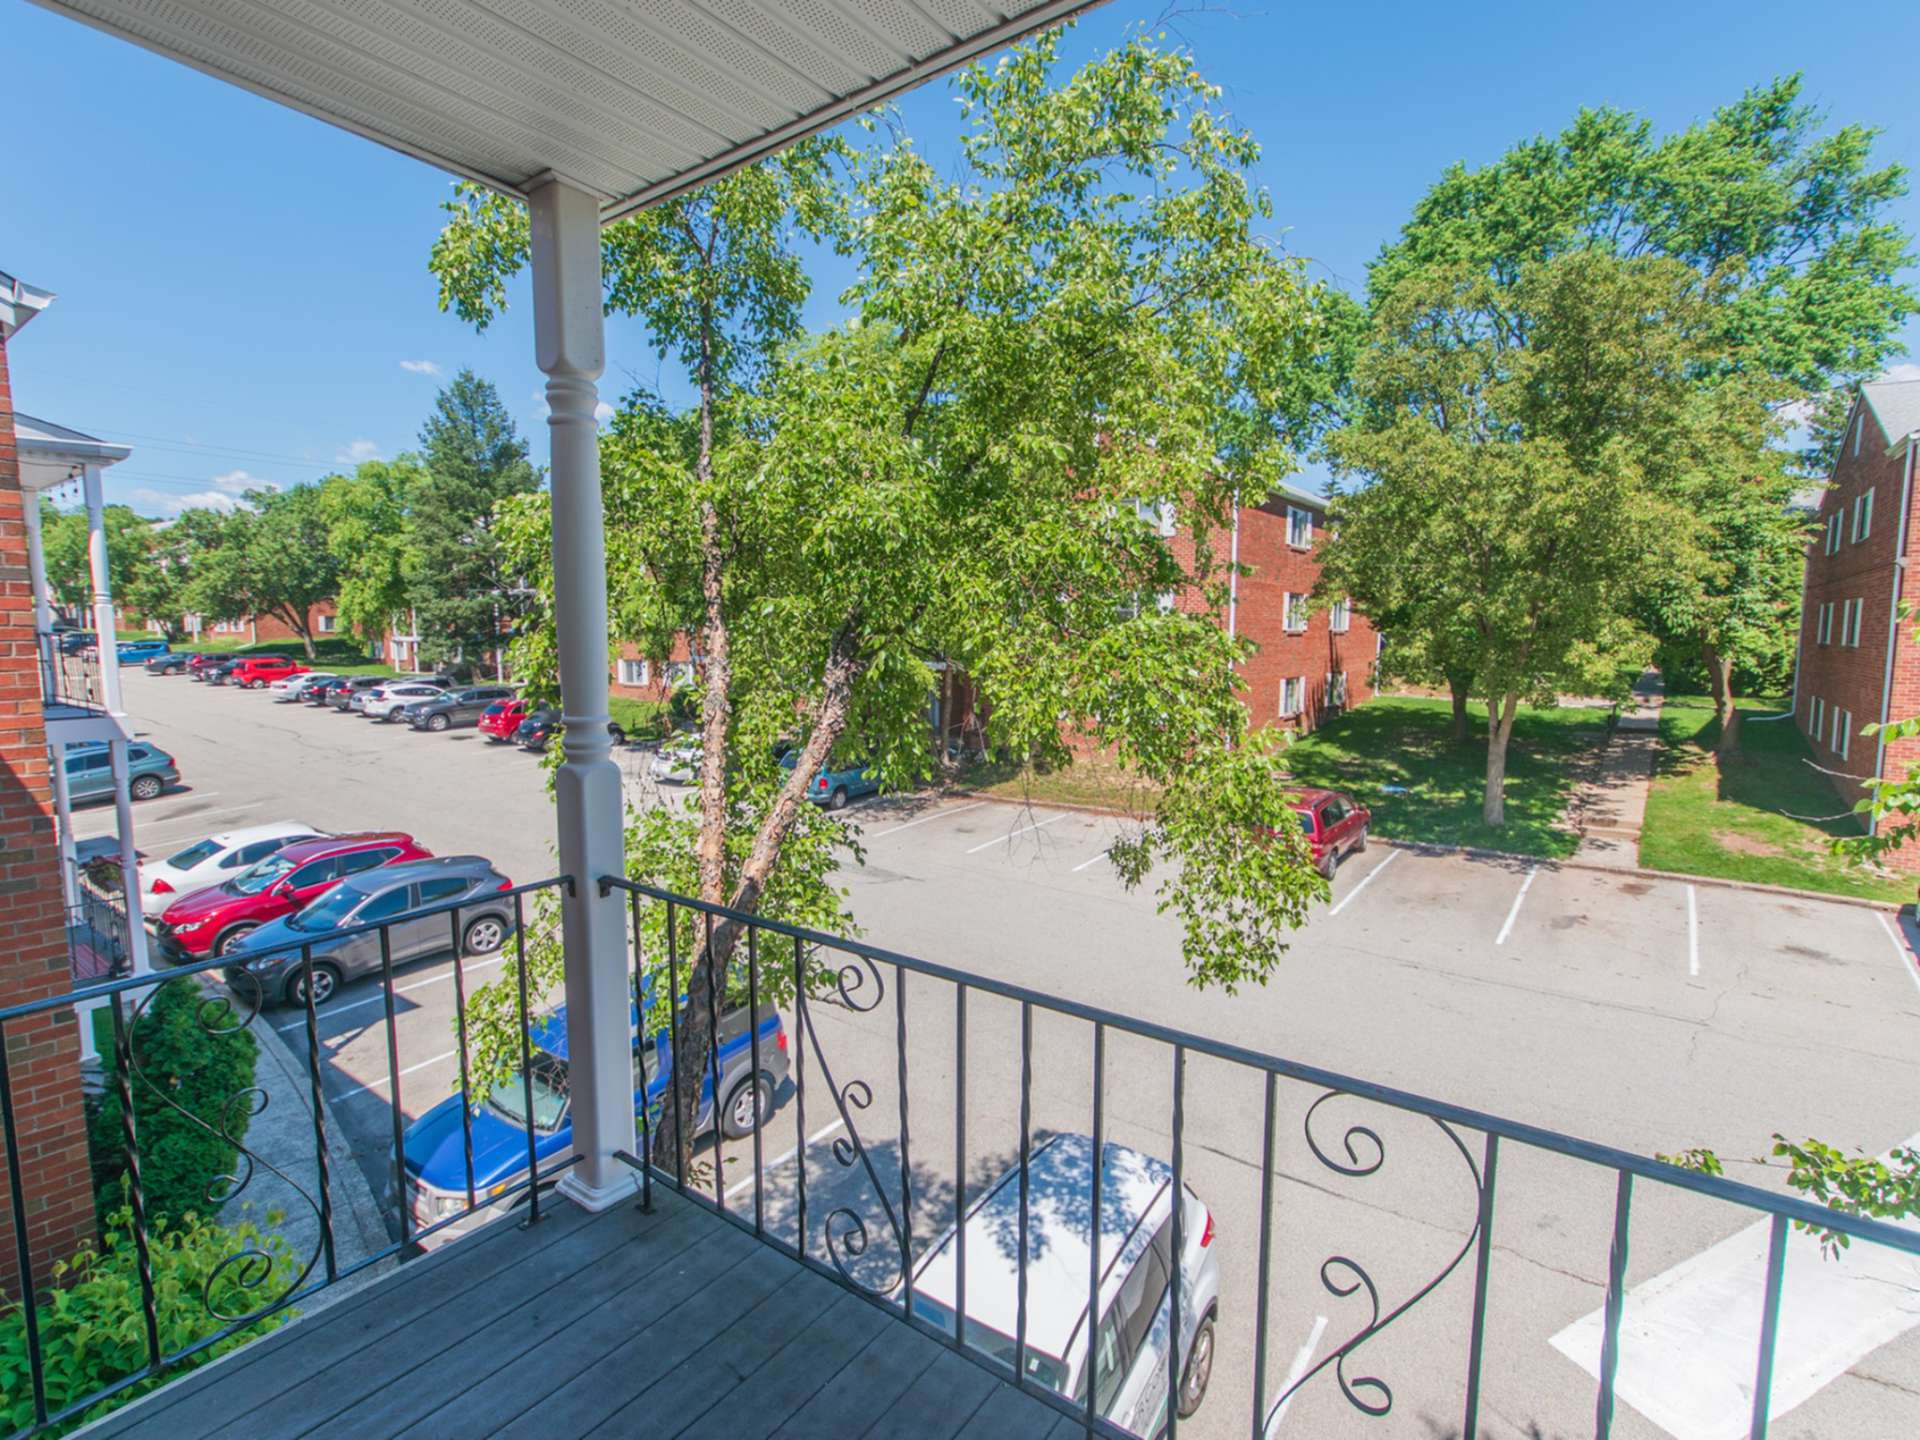 Balcony of an apartment at Jamestown Village with a view of the parking lot and other apartment buildings.